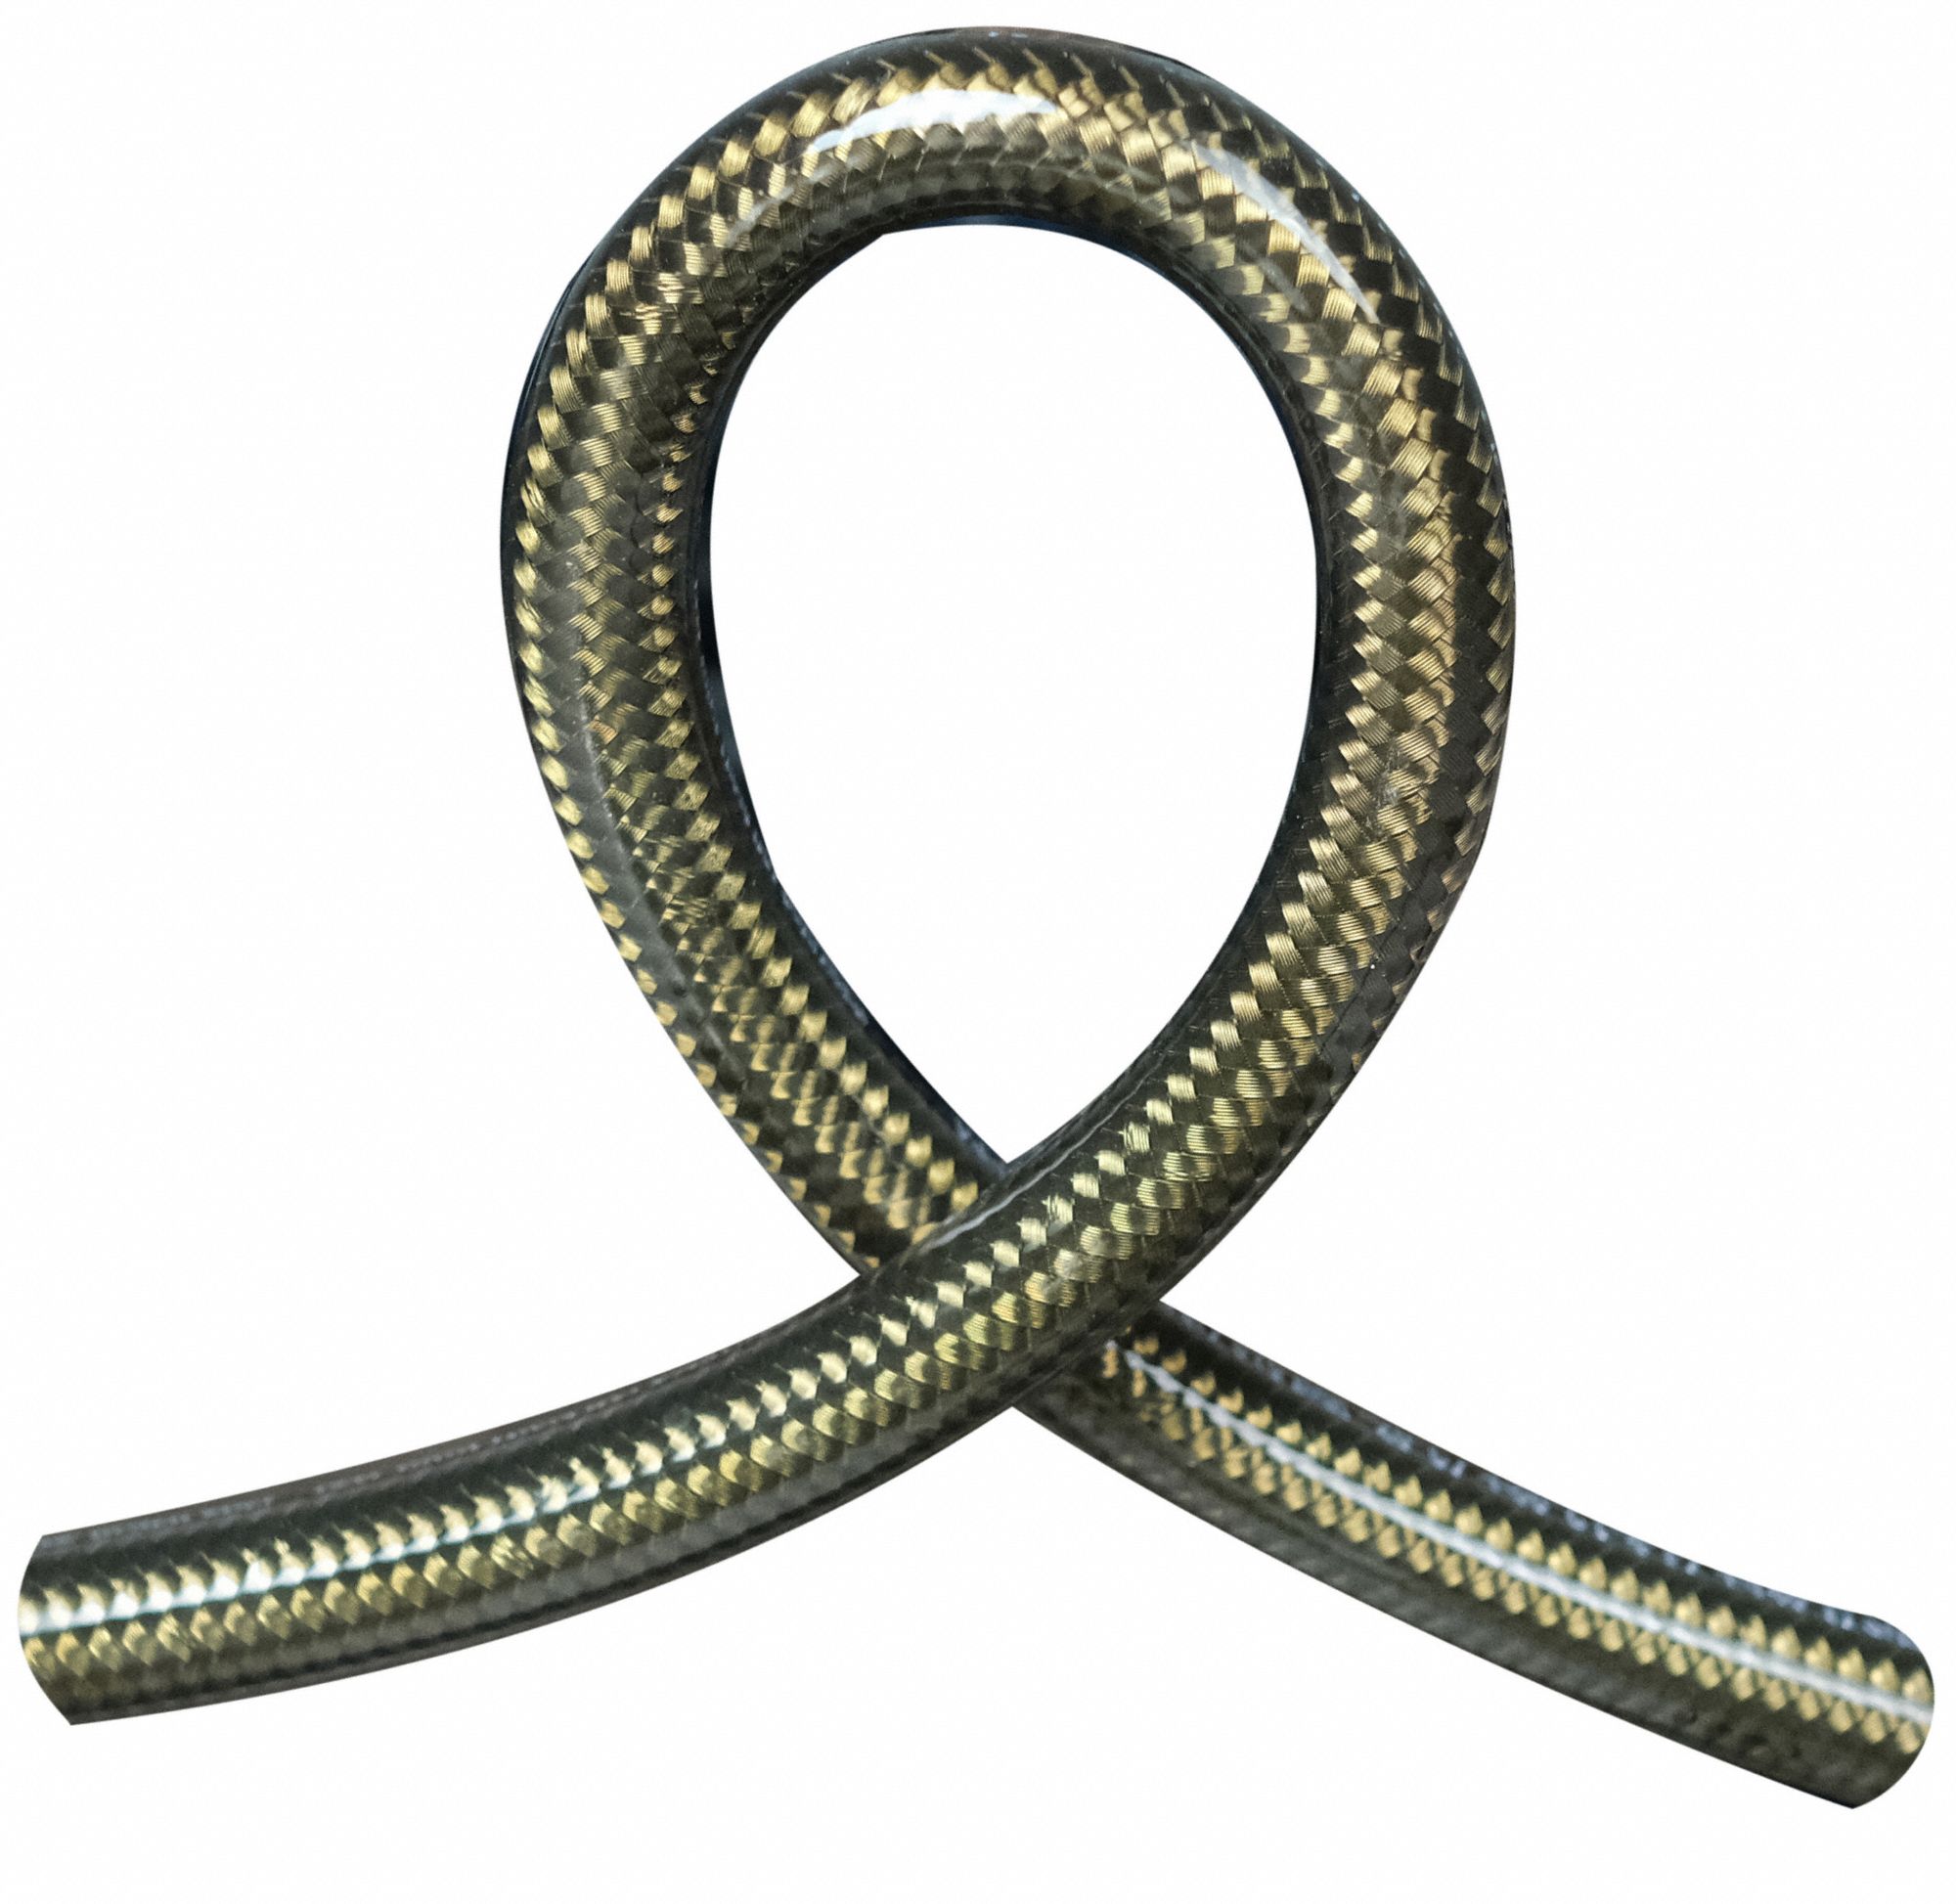 Simpson 41028 Pressure Washer Hose 3/8" x 50' 4500 PSI Cold Water 